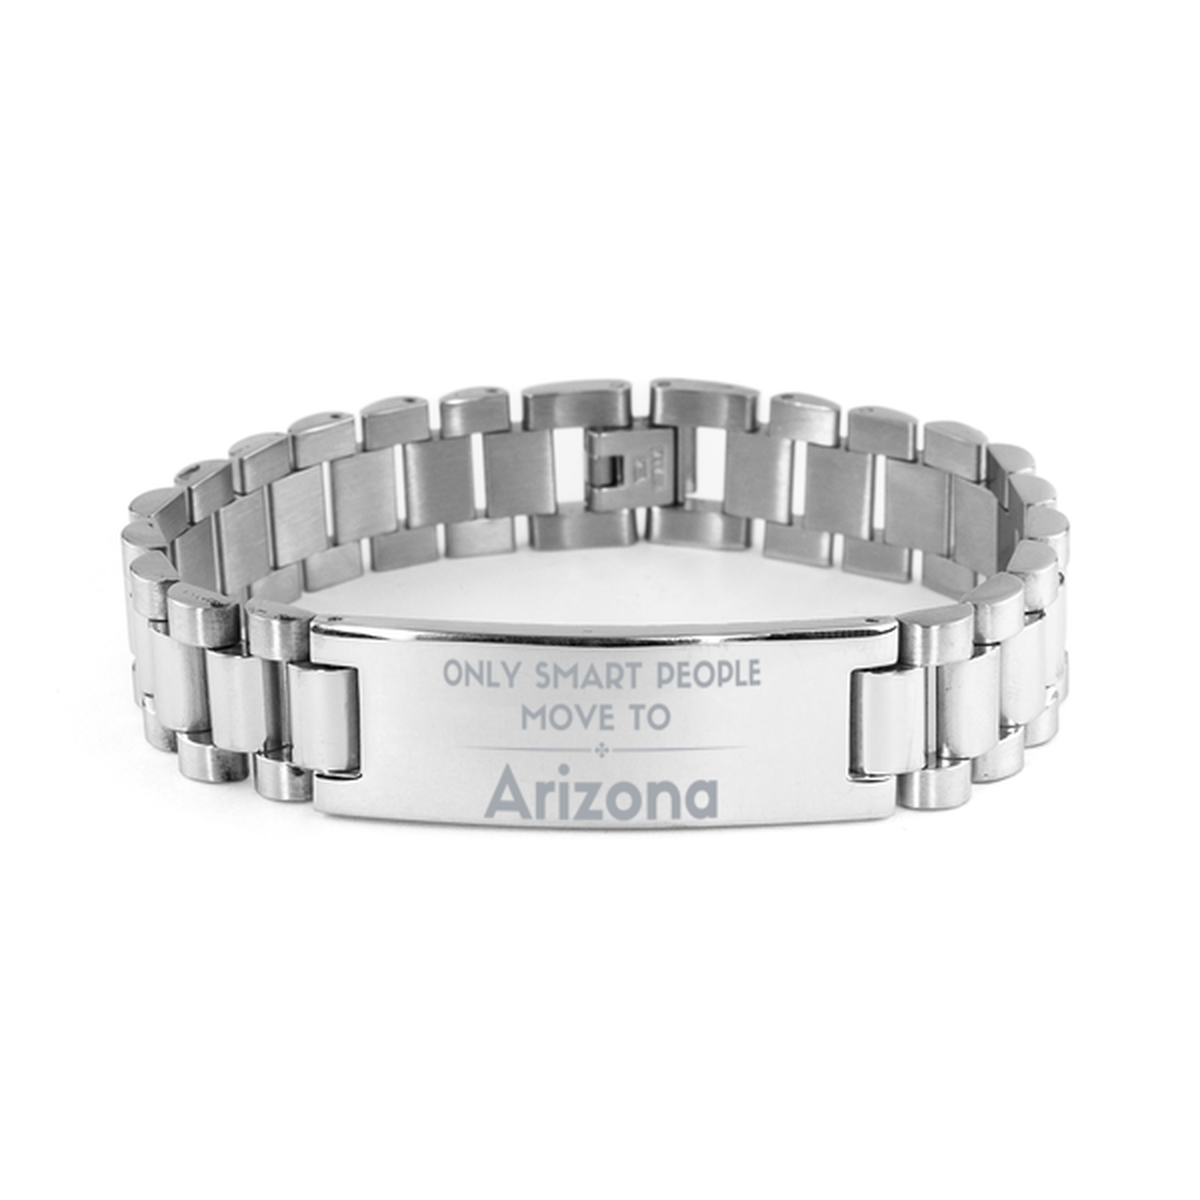 Only smart people move to Arizona Ladder Stainless Steel Bracelet, Gag Gifts For Arizona, Move to Arizona Gifts for Friends Coworker Funny Saying Quote